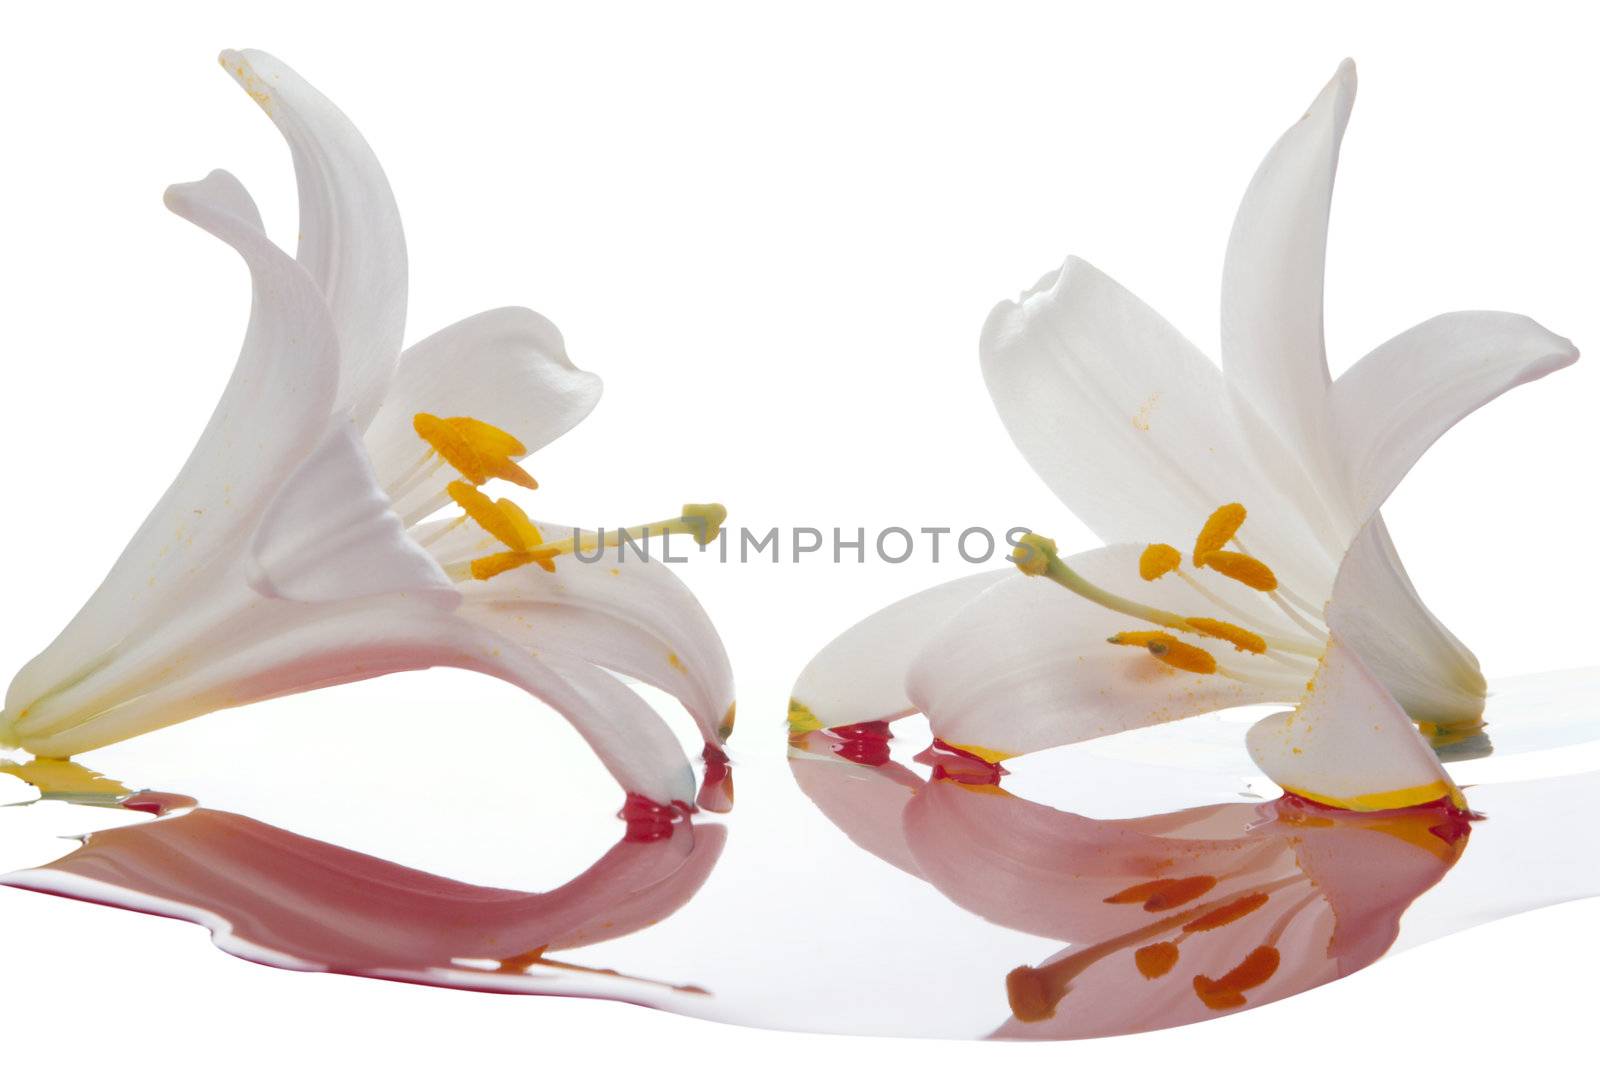 The abstract image from three colors on a white background